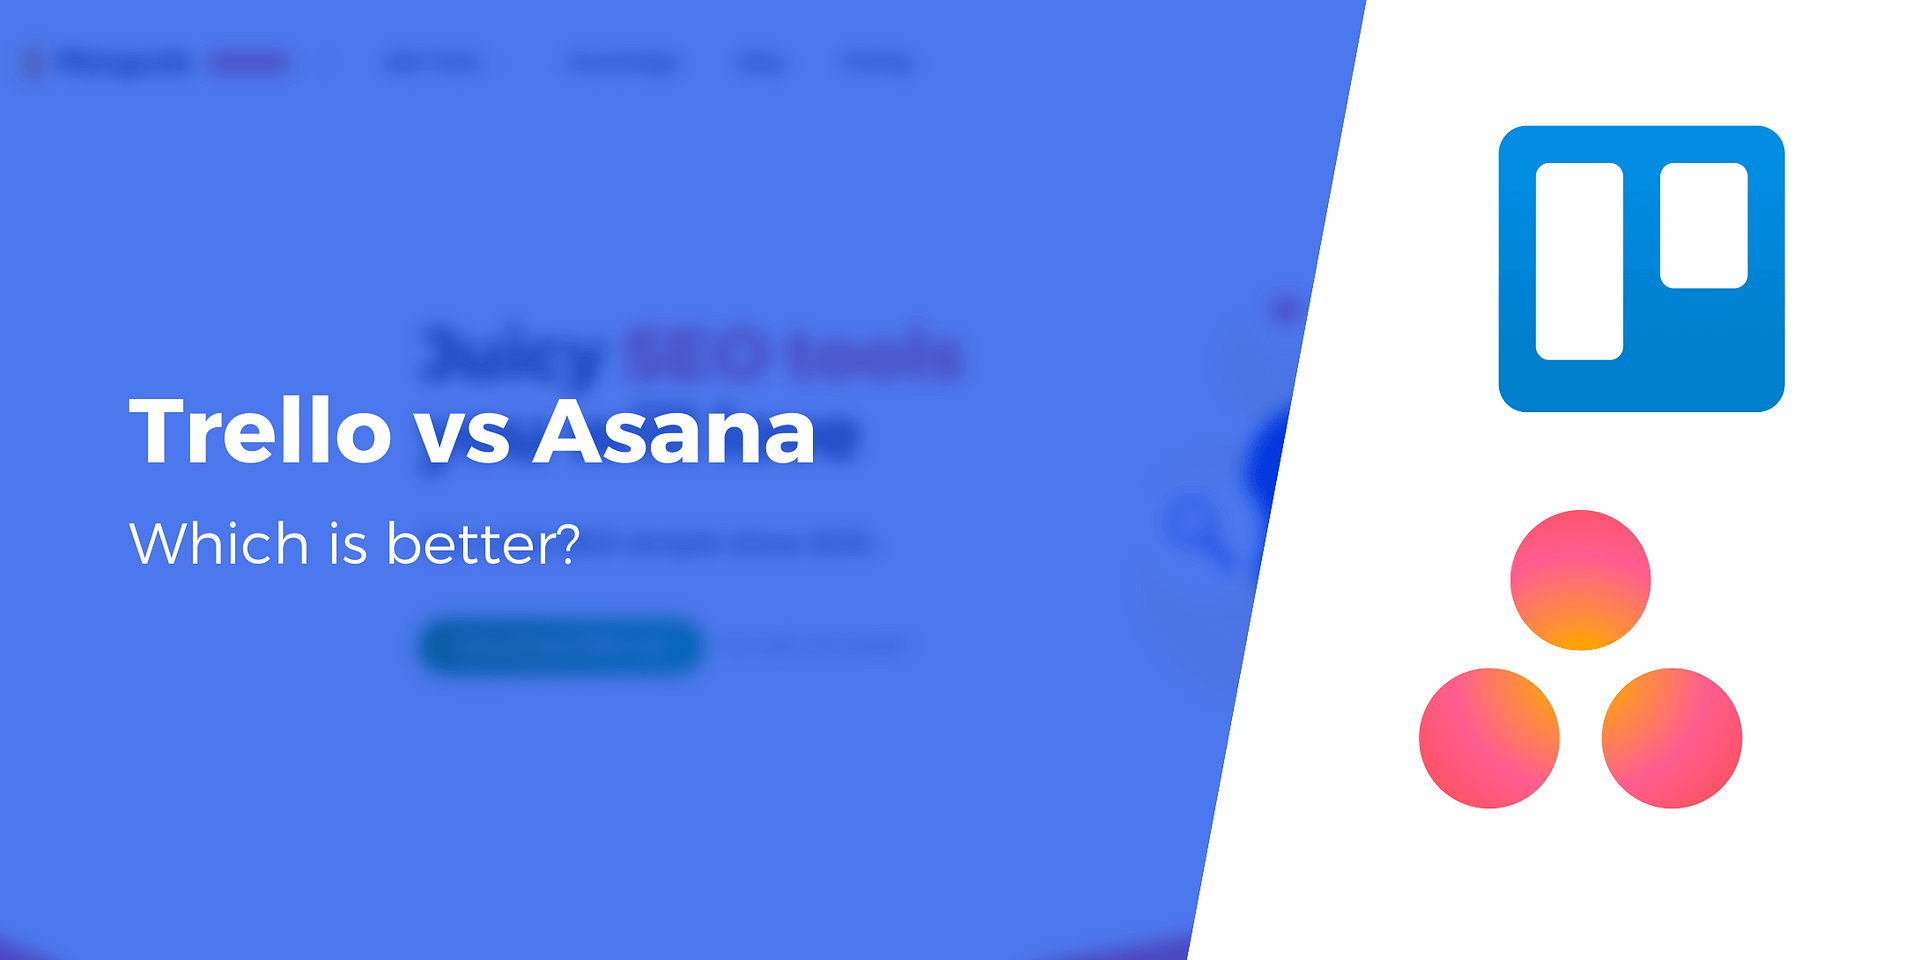 Trello vs. Asana: Which Is Best For Your Team?